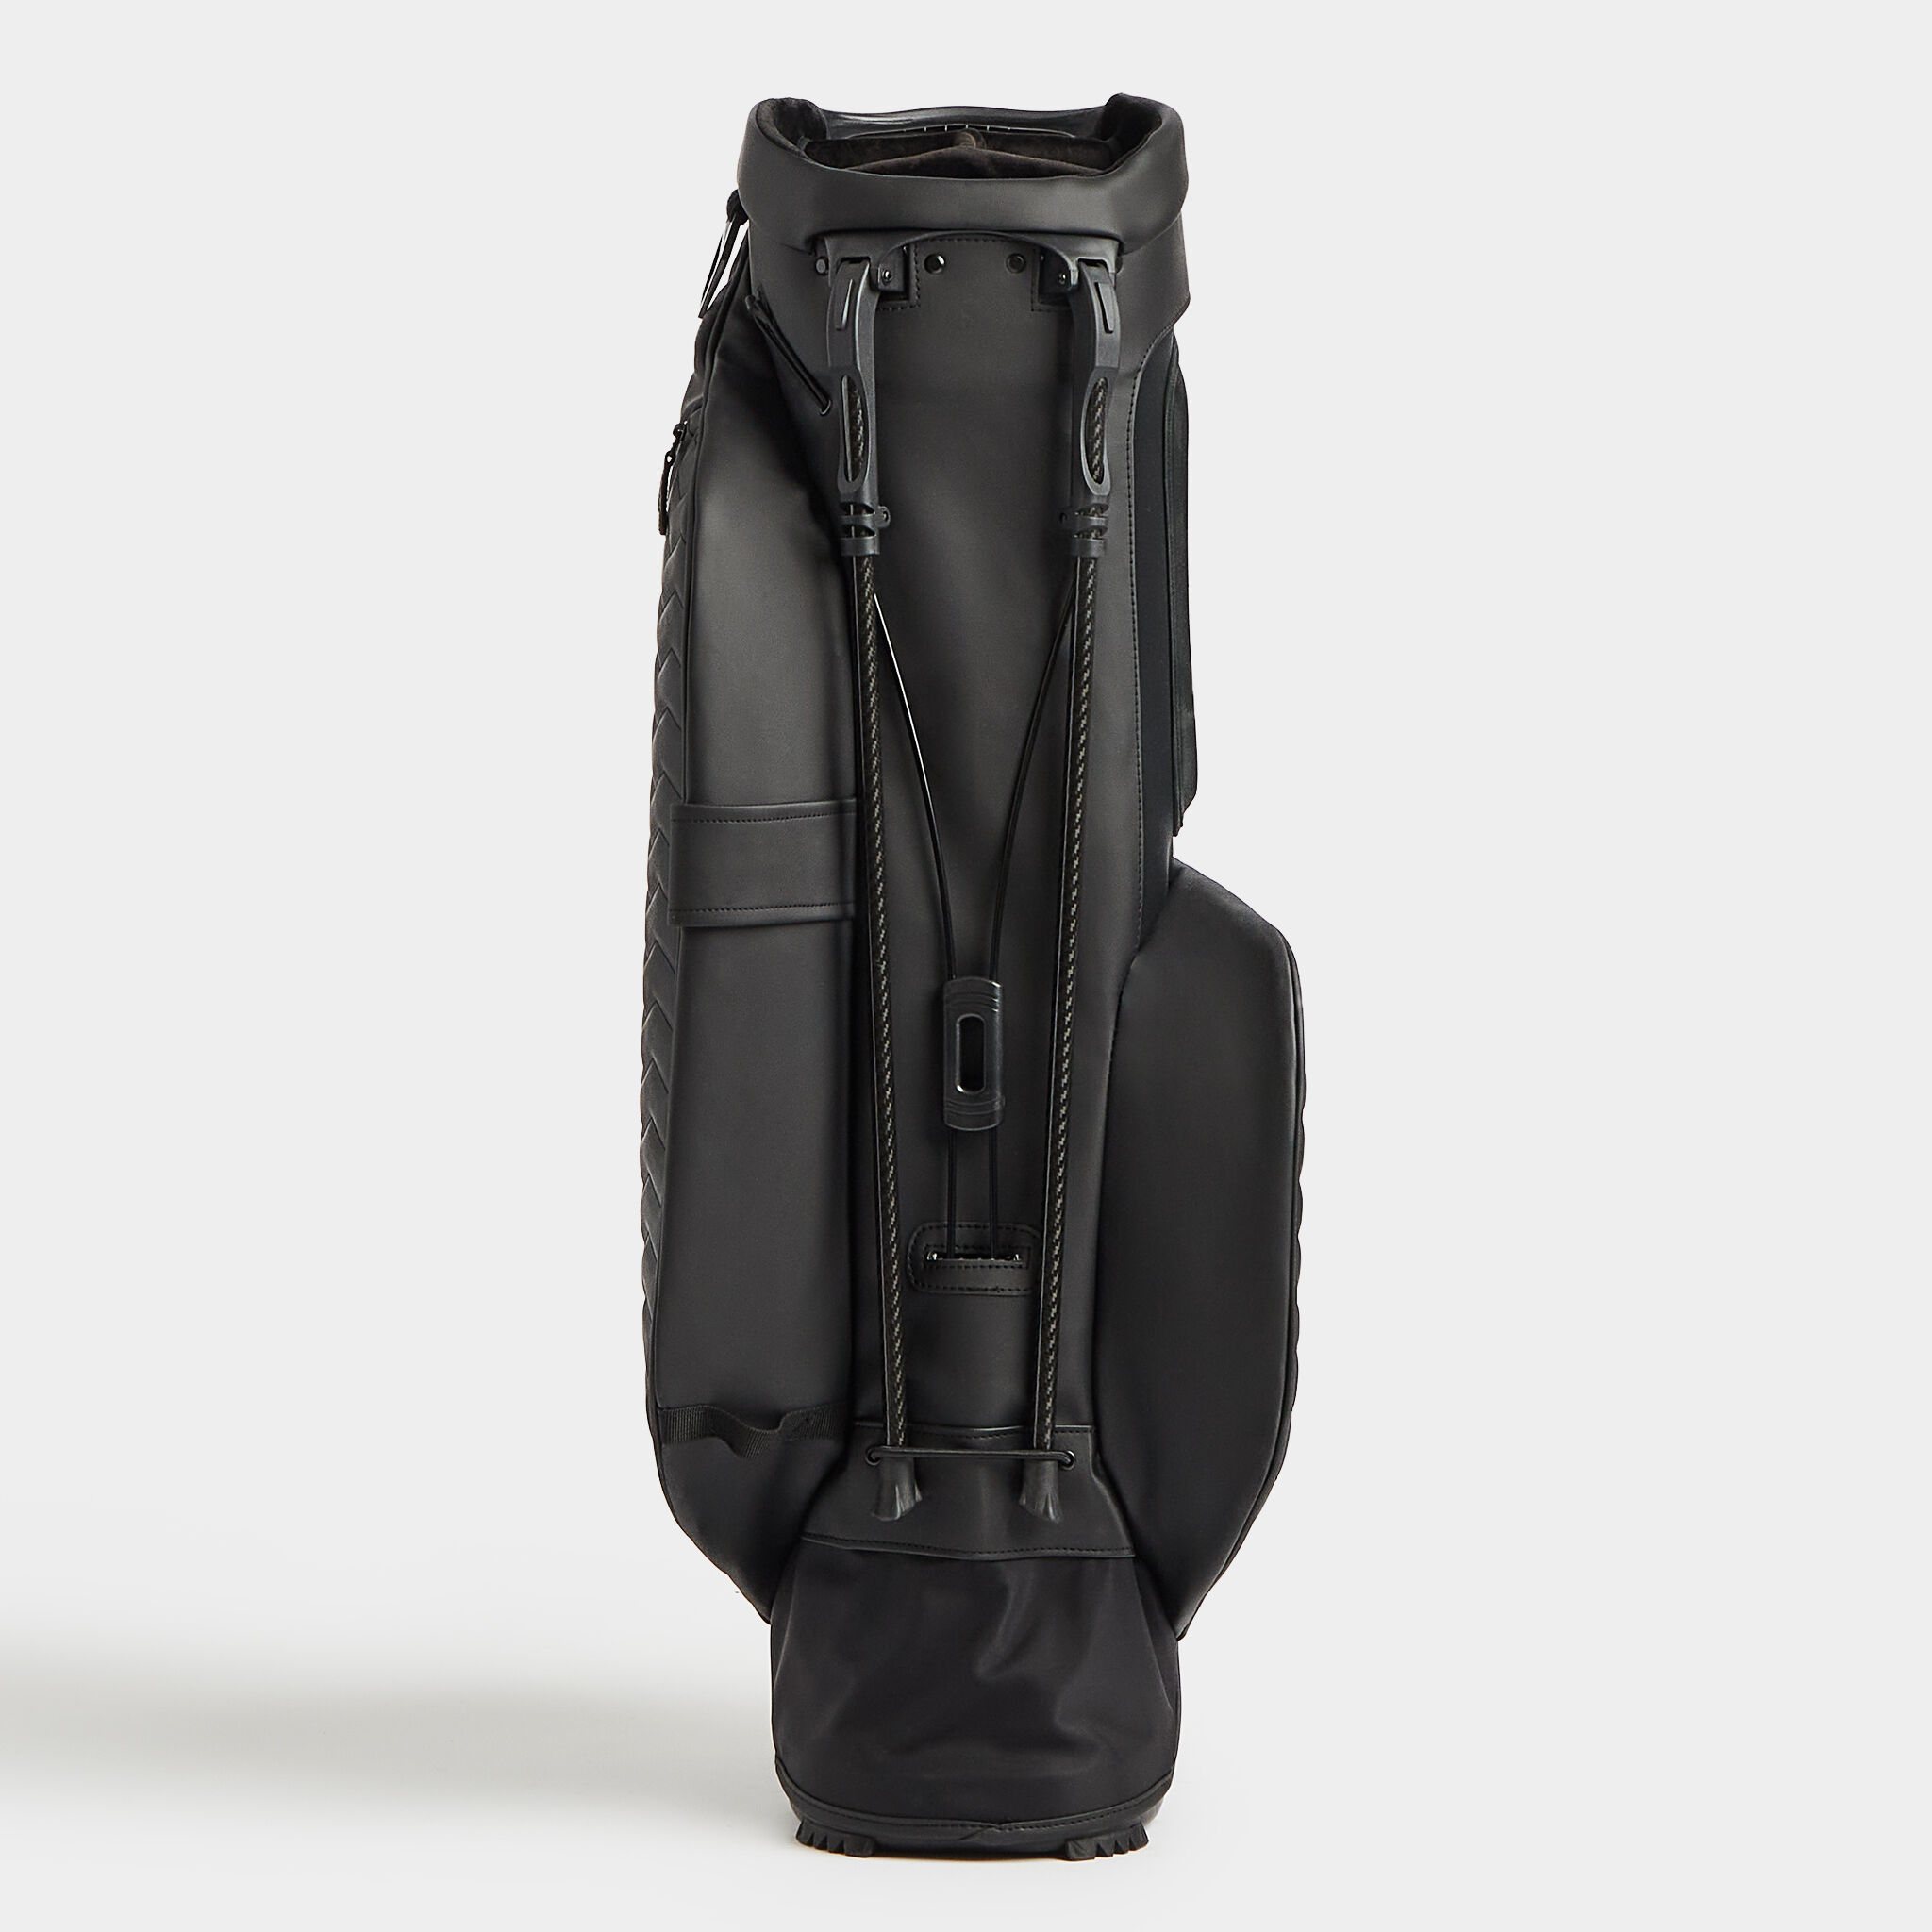 TRANSPORTER TOUR CARRY GOLF BAG | GOLF BAGS FOR MEN AND WOMEN | G/FORE